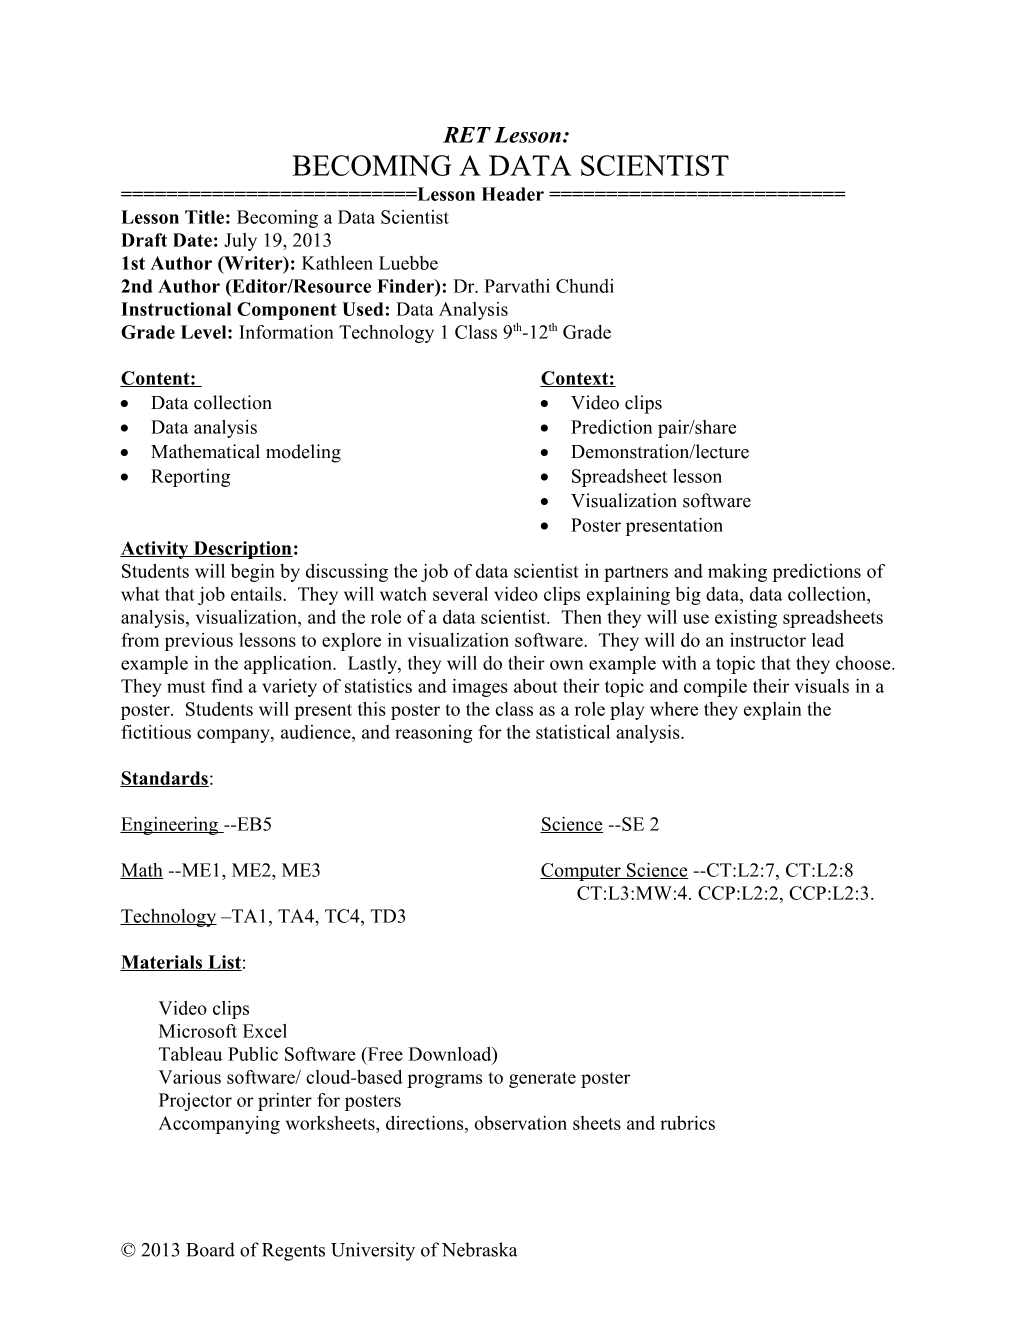 Becoming a Data Scientist